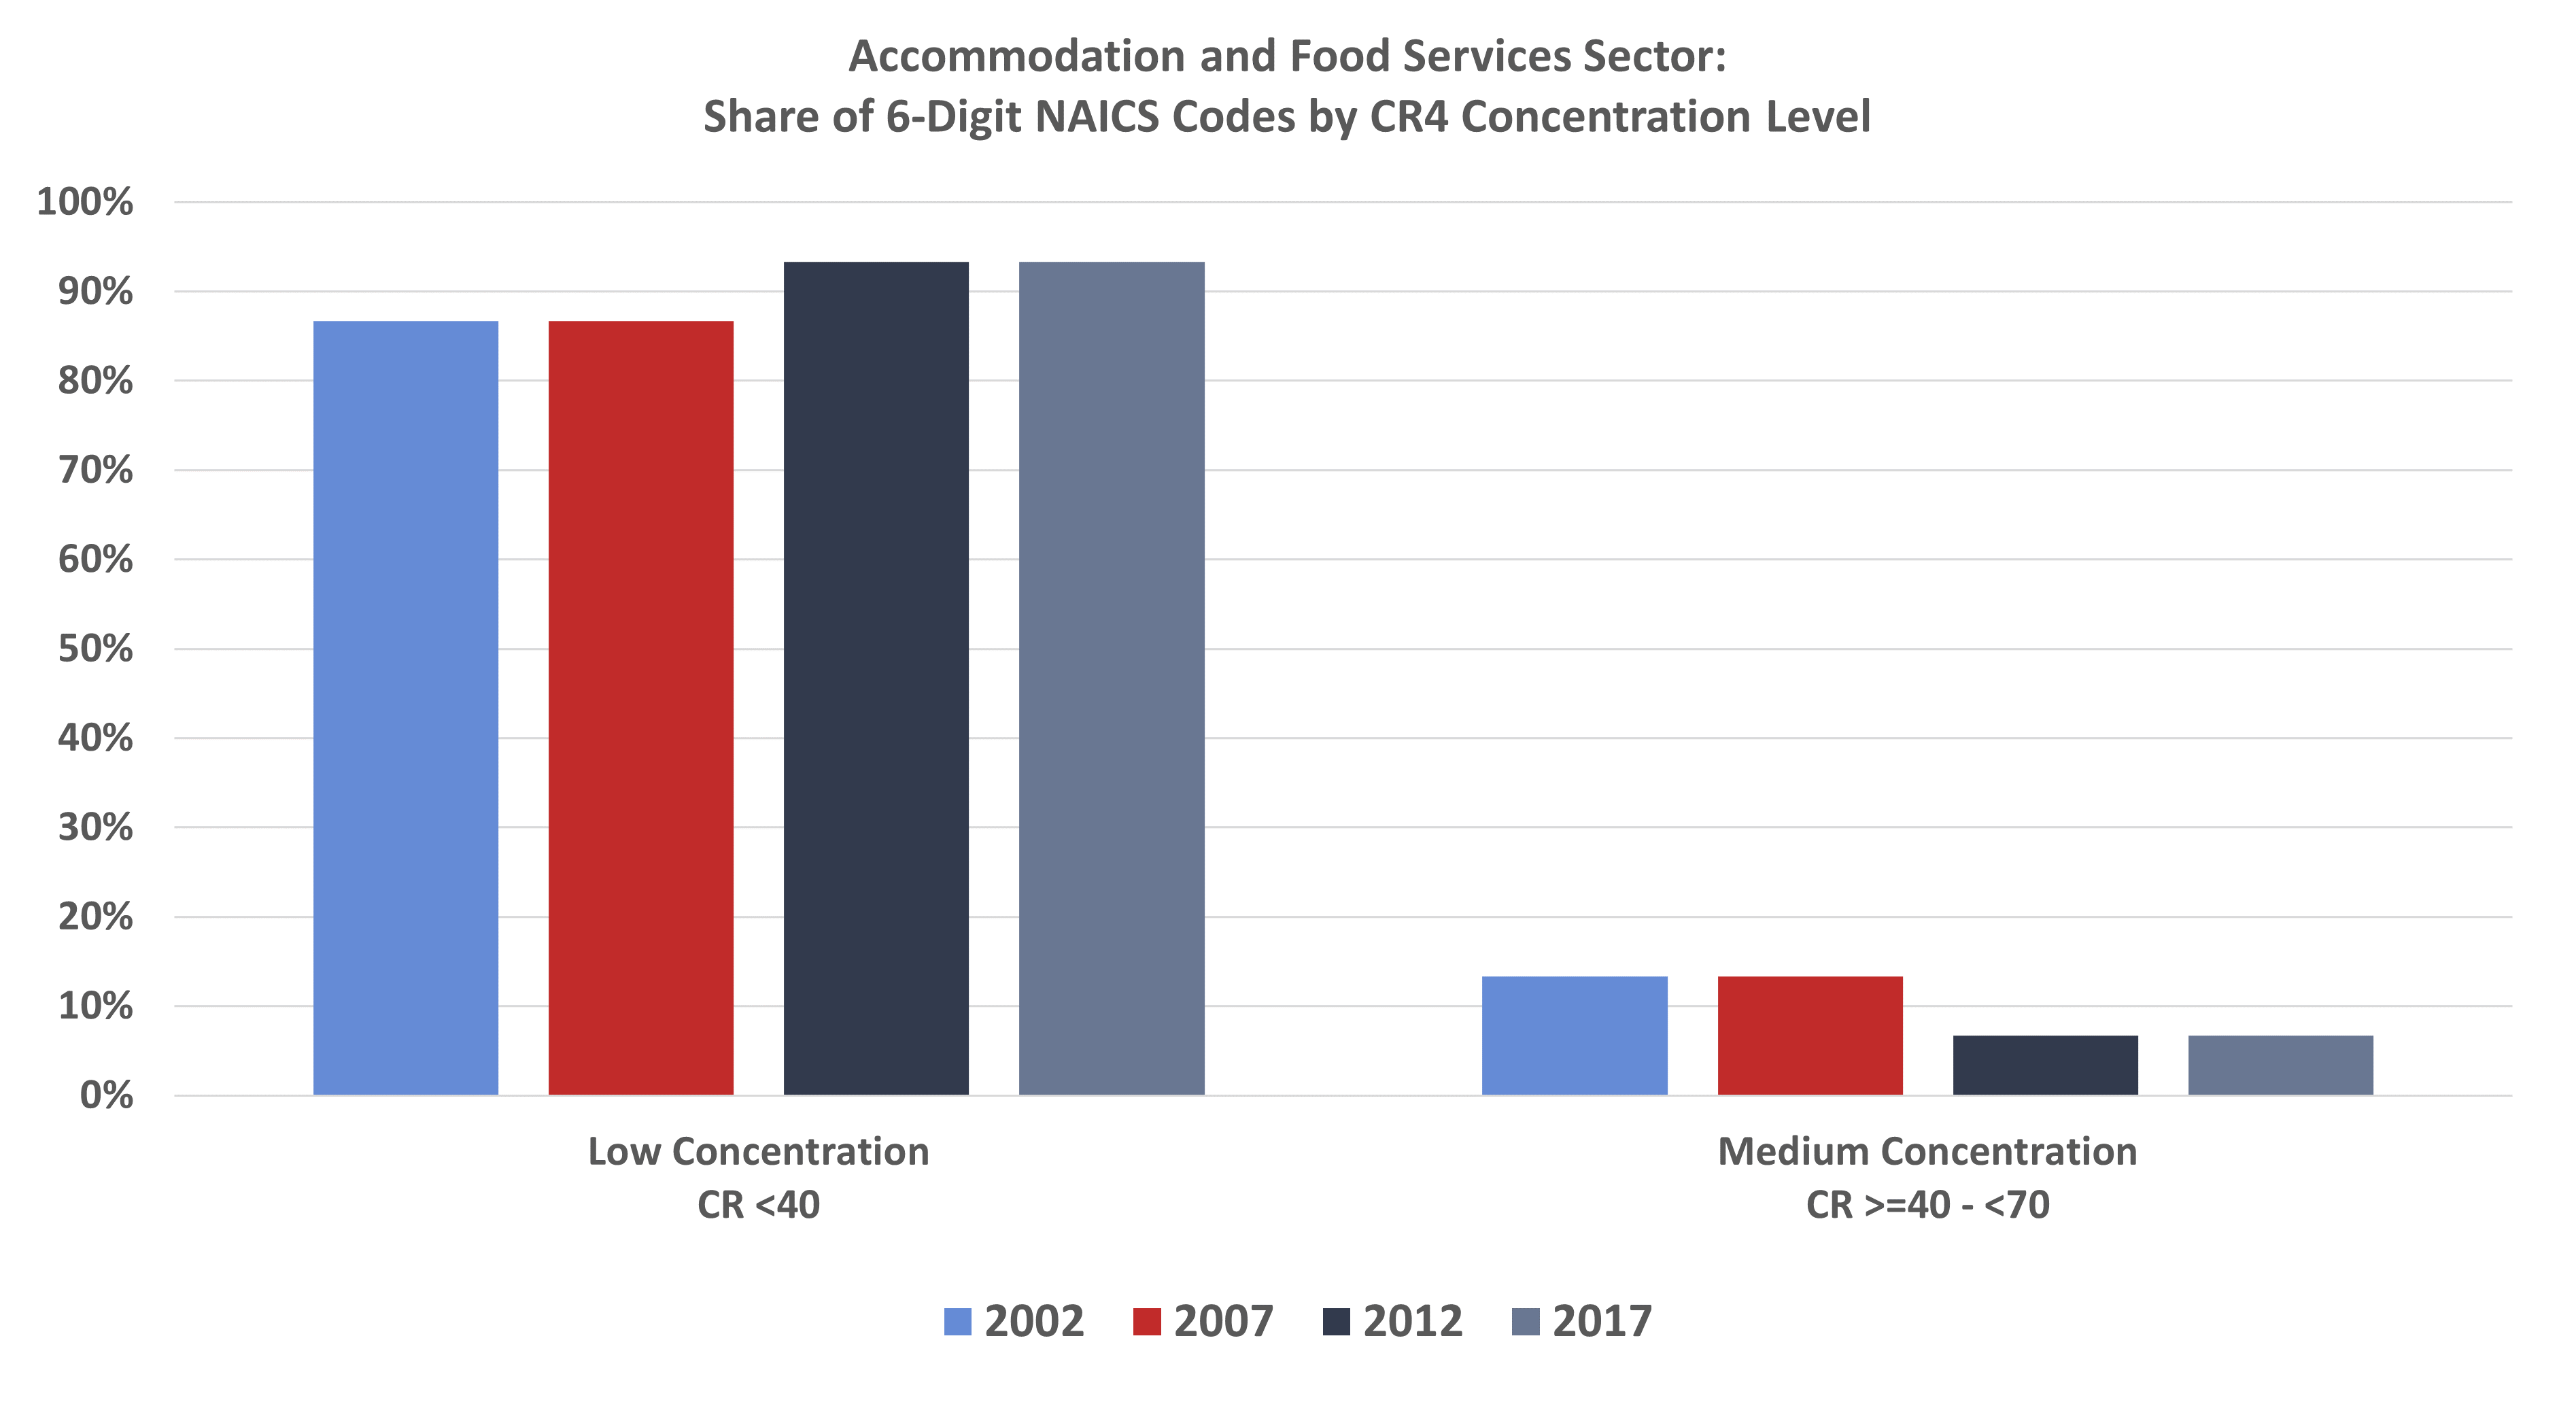 Accommodation and Food Services Sector: Share of 6-Digit NAICS Codes by CR4 Concentration Level